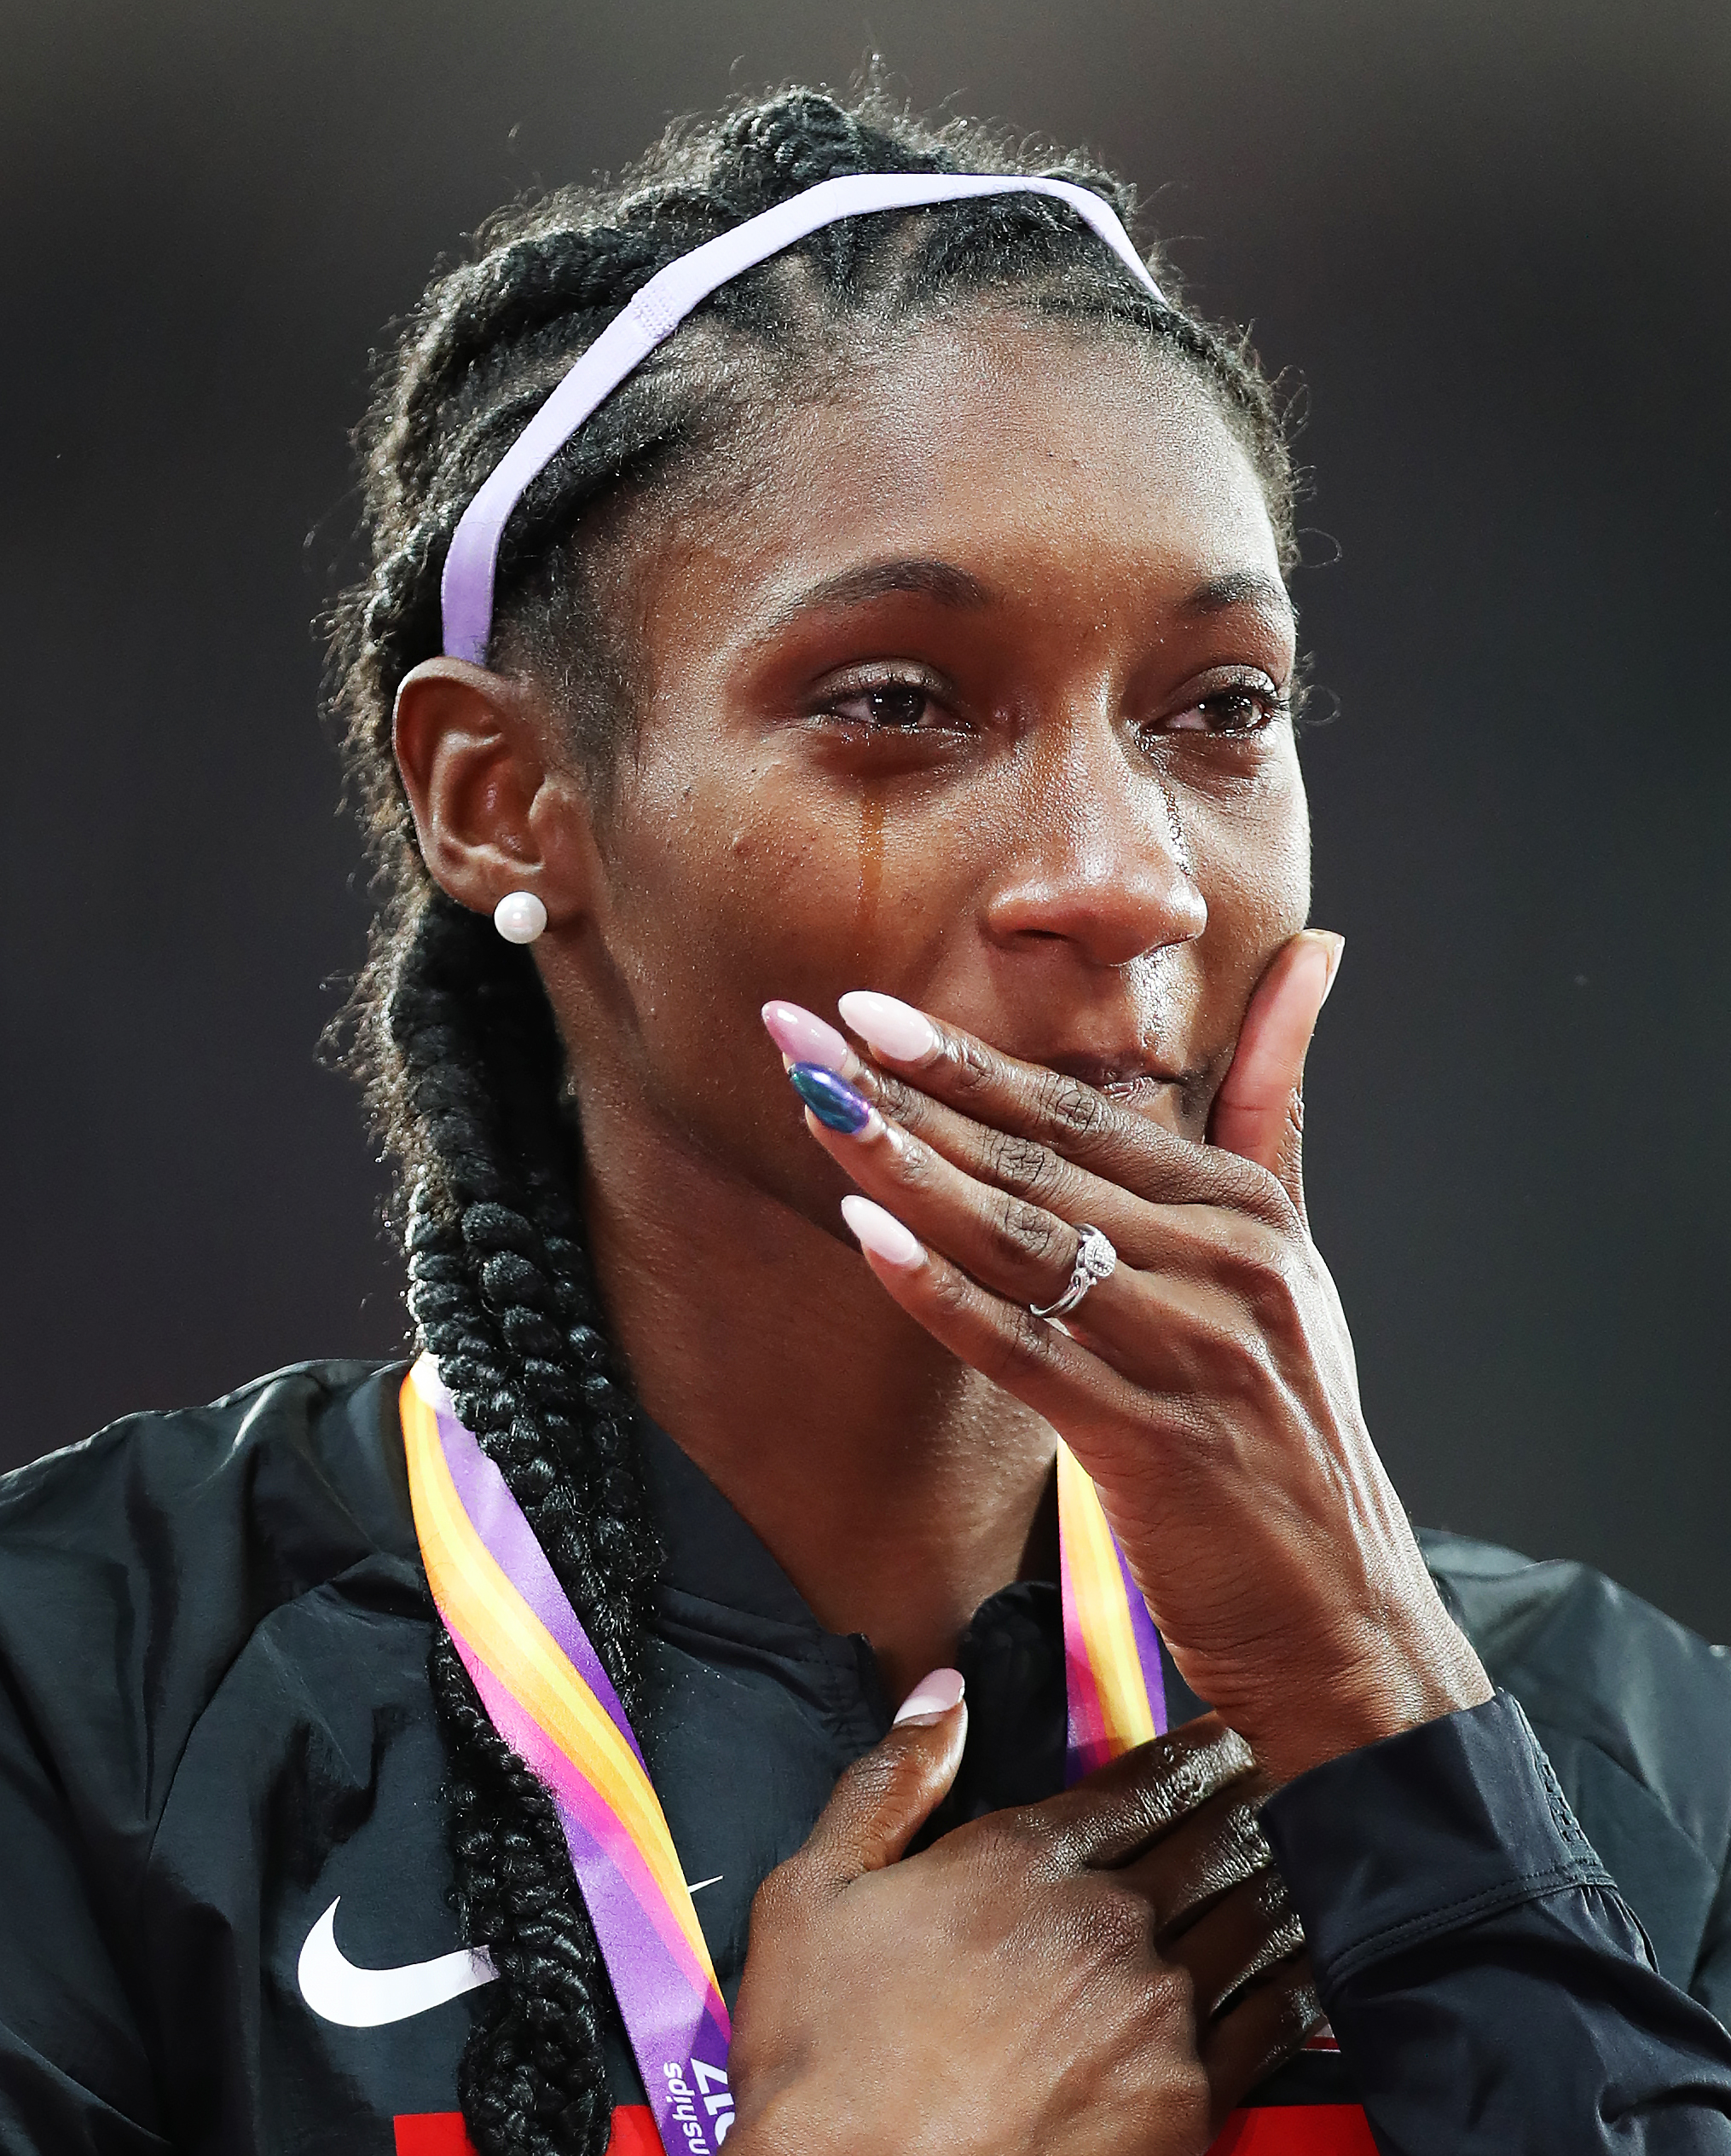 Tori Bowie of United States is seen on the podium with her gold medal from the Women's 4100m Relay final during day ten of the 16th IAAF World Athletics Championships London 2017 at The London Stadium on August 13, 2017 in London, United Kingdom. | Source: Getty Images